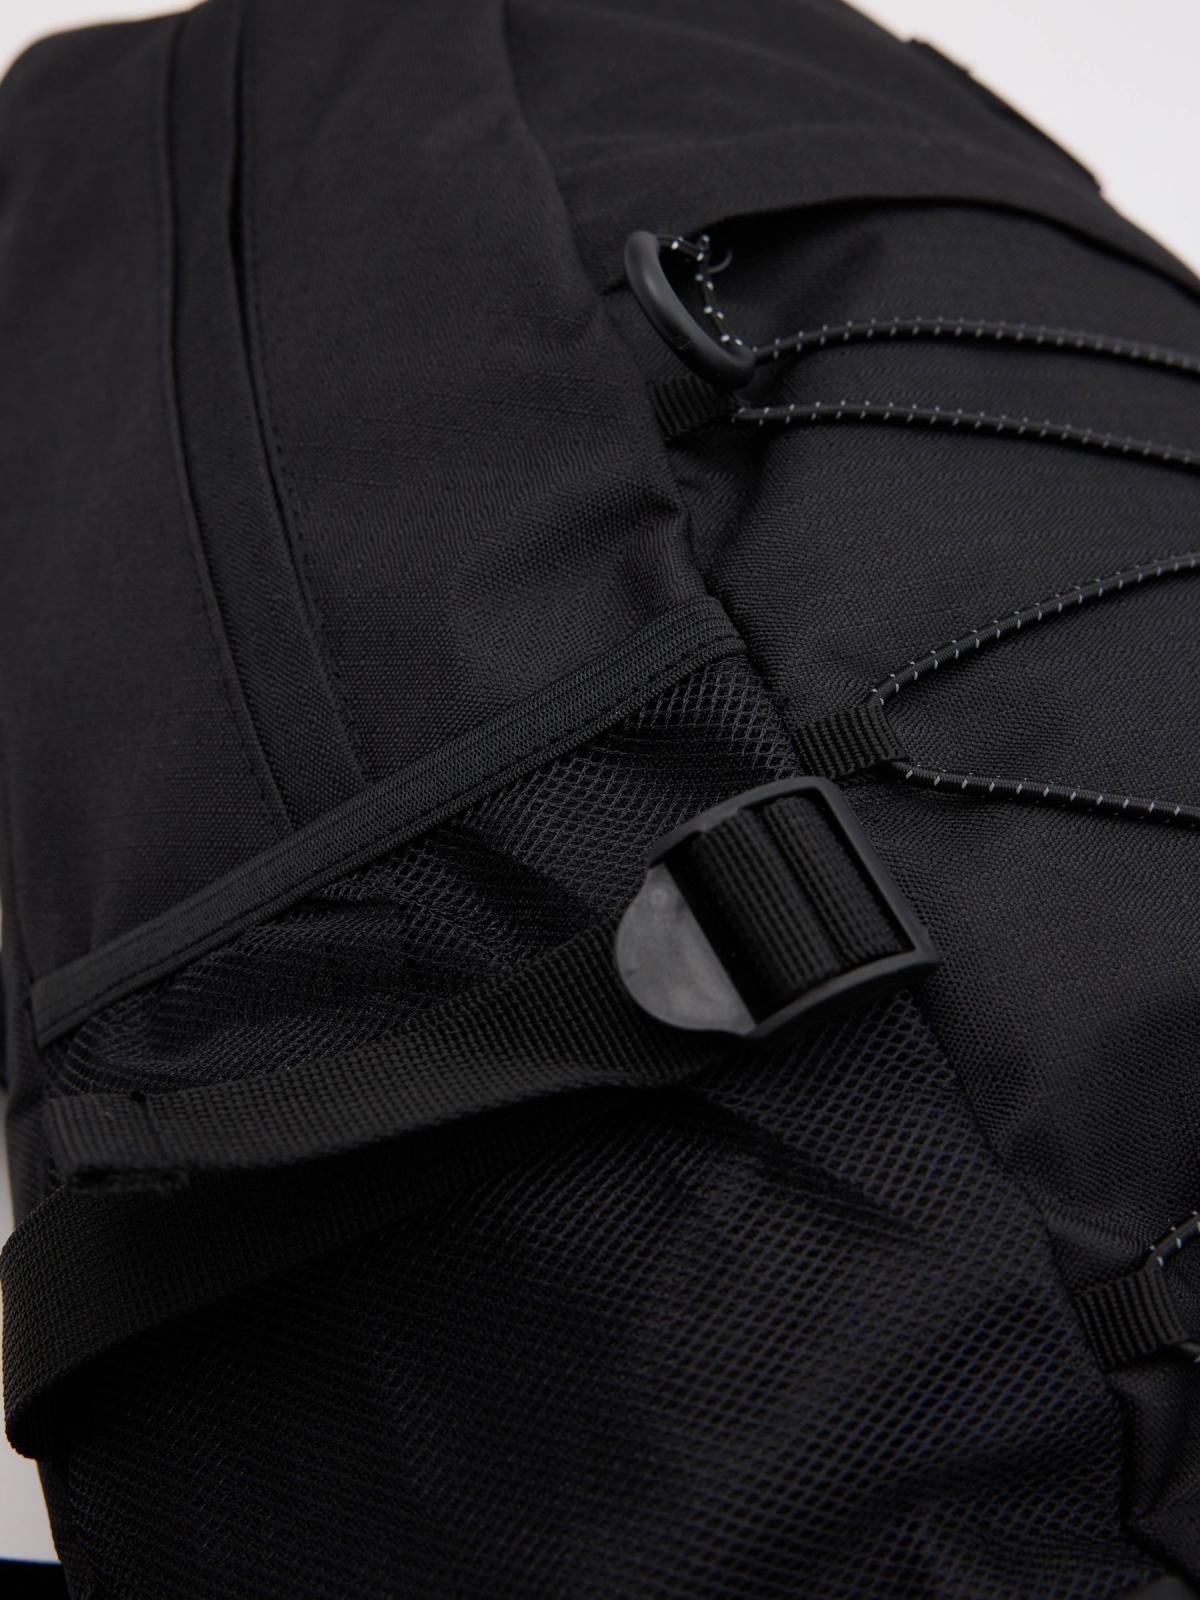 Polyester sports backpack black detail view